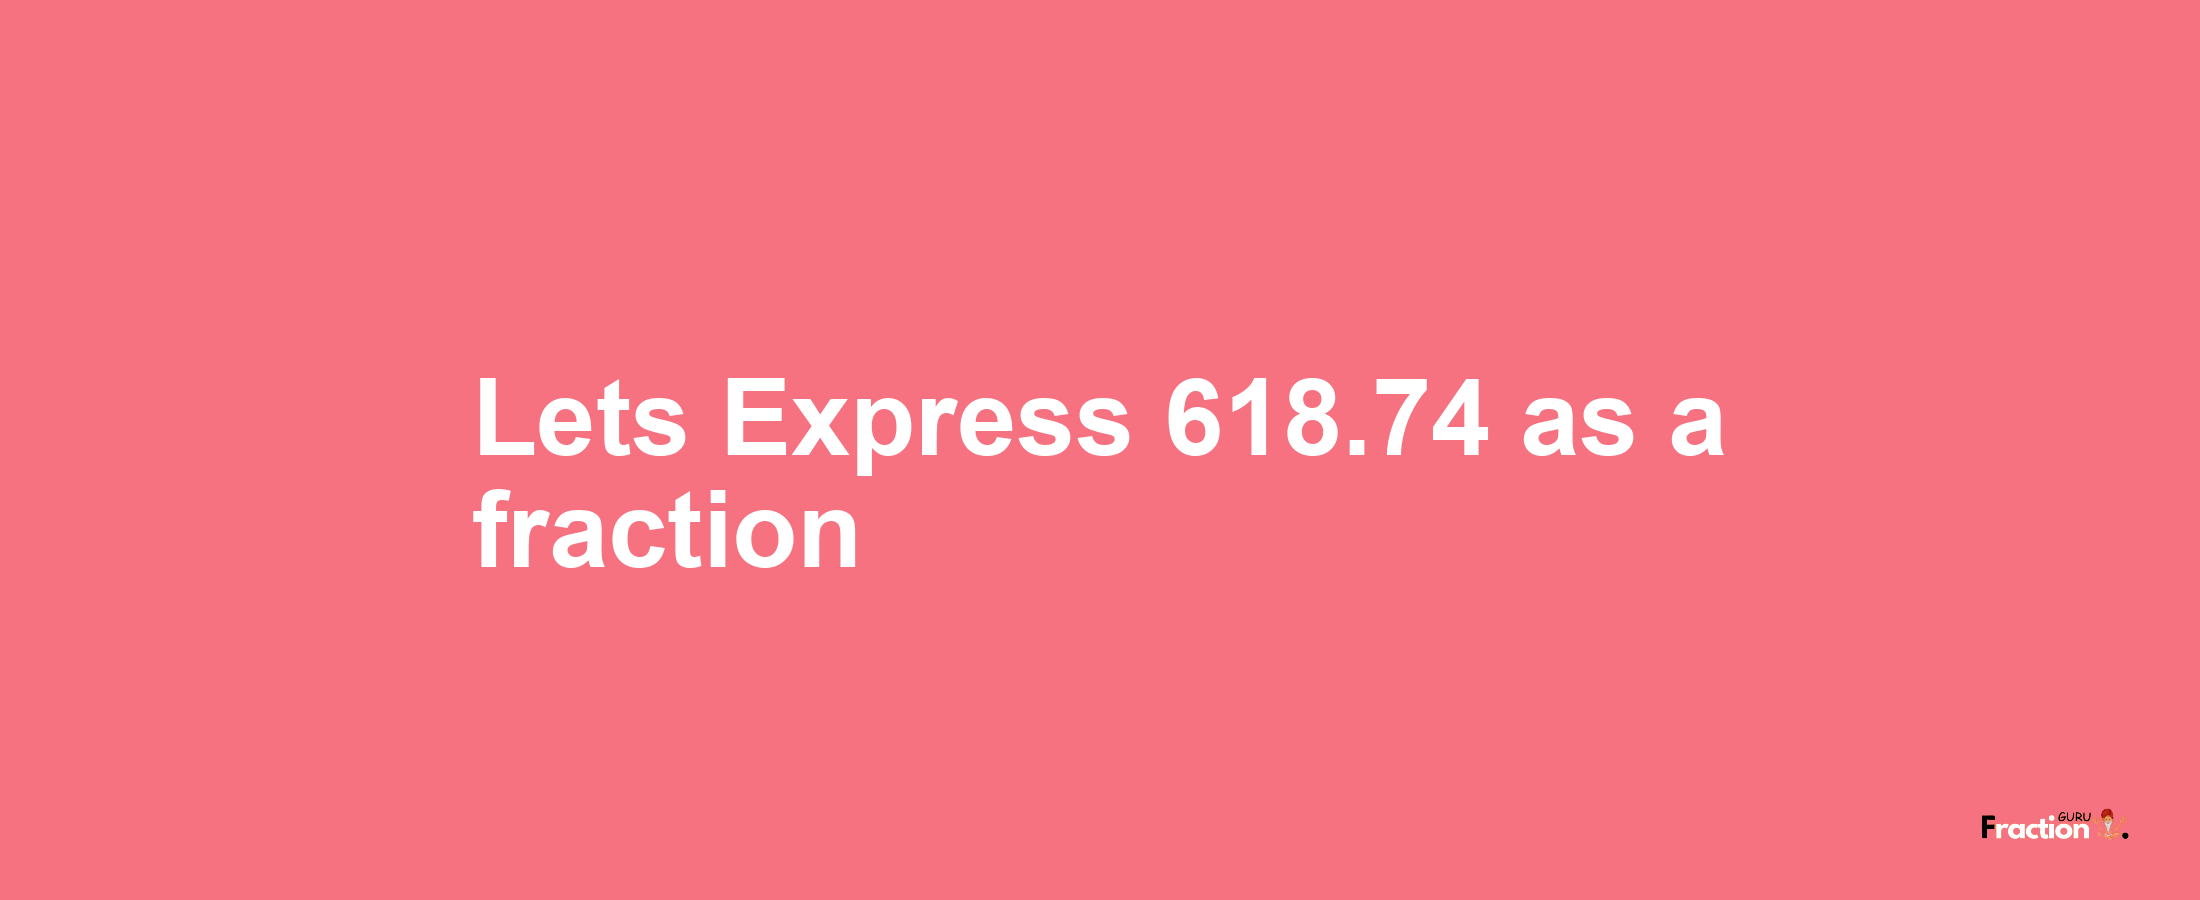 Lets Express 618.74 as afraction